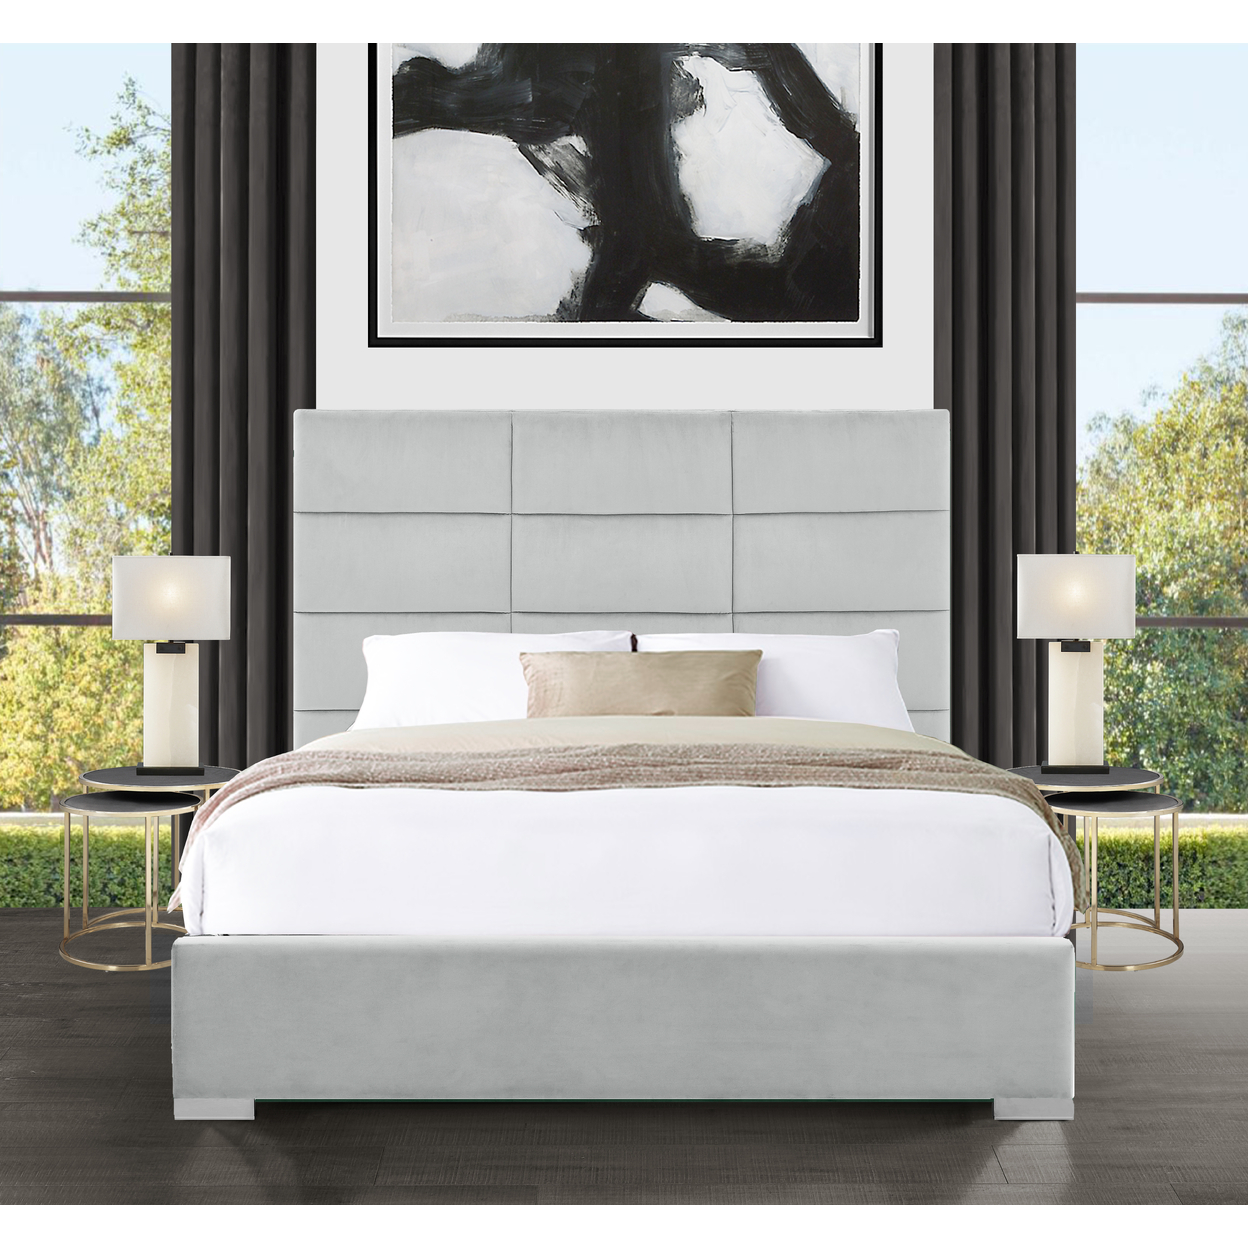 Iconic Home Durazzo Storage Platform Bed Frame With Headboard Velvet Upholstered Box Quilted, Modern Contemporary - Silver, King